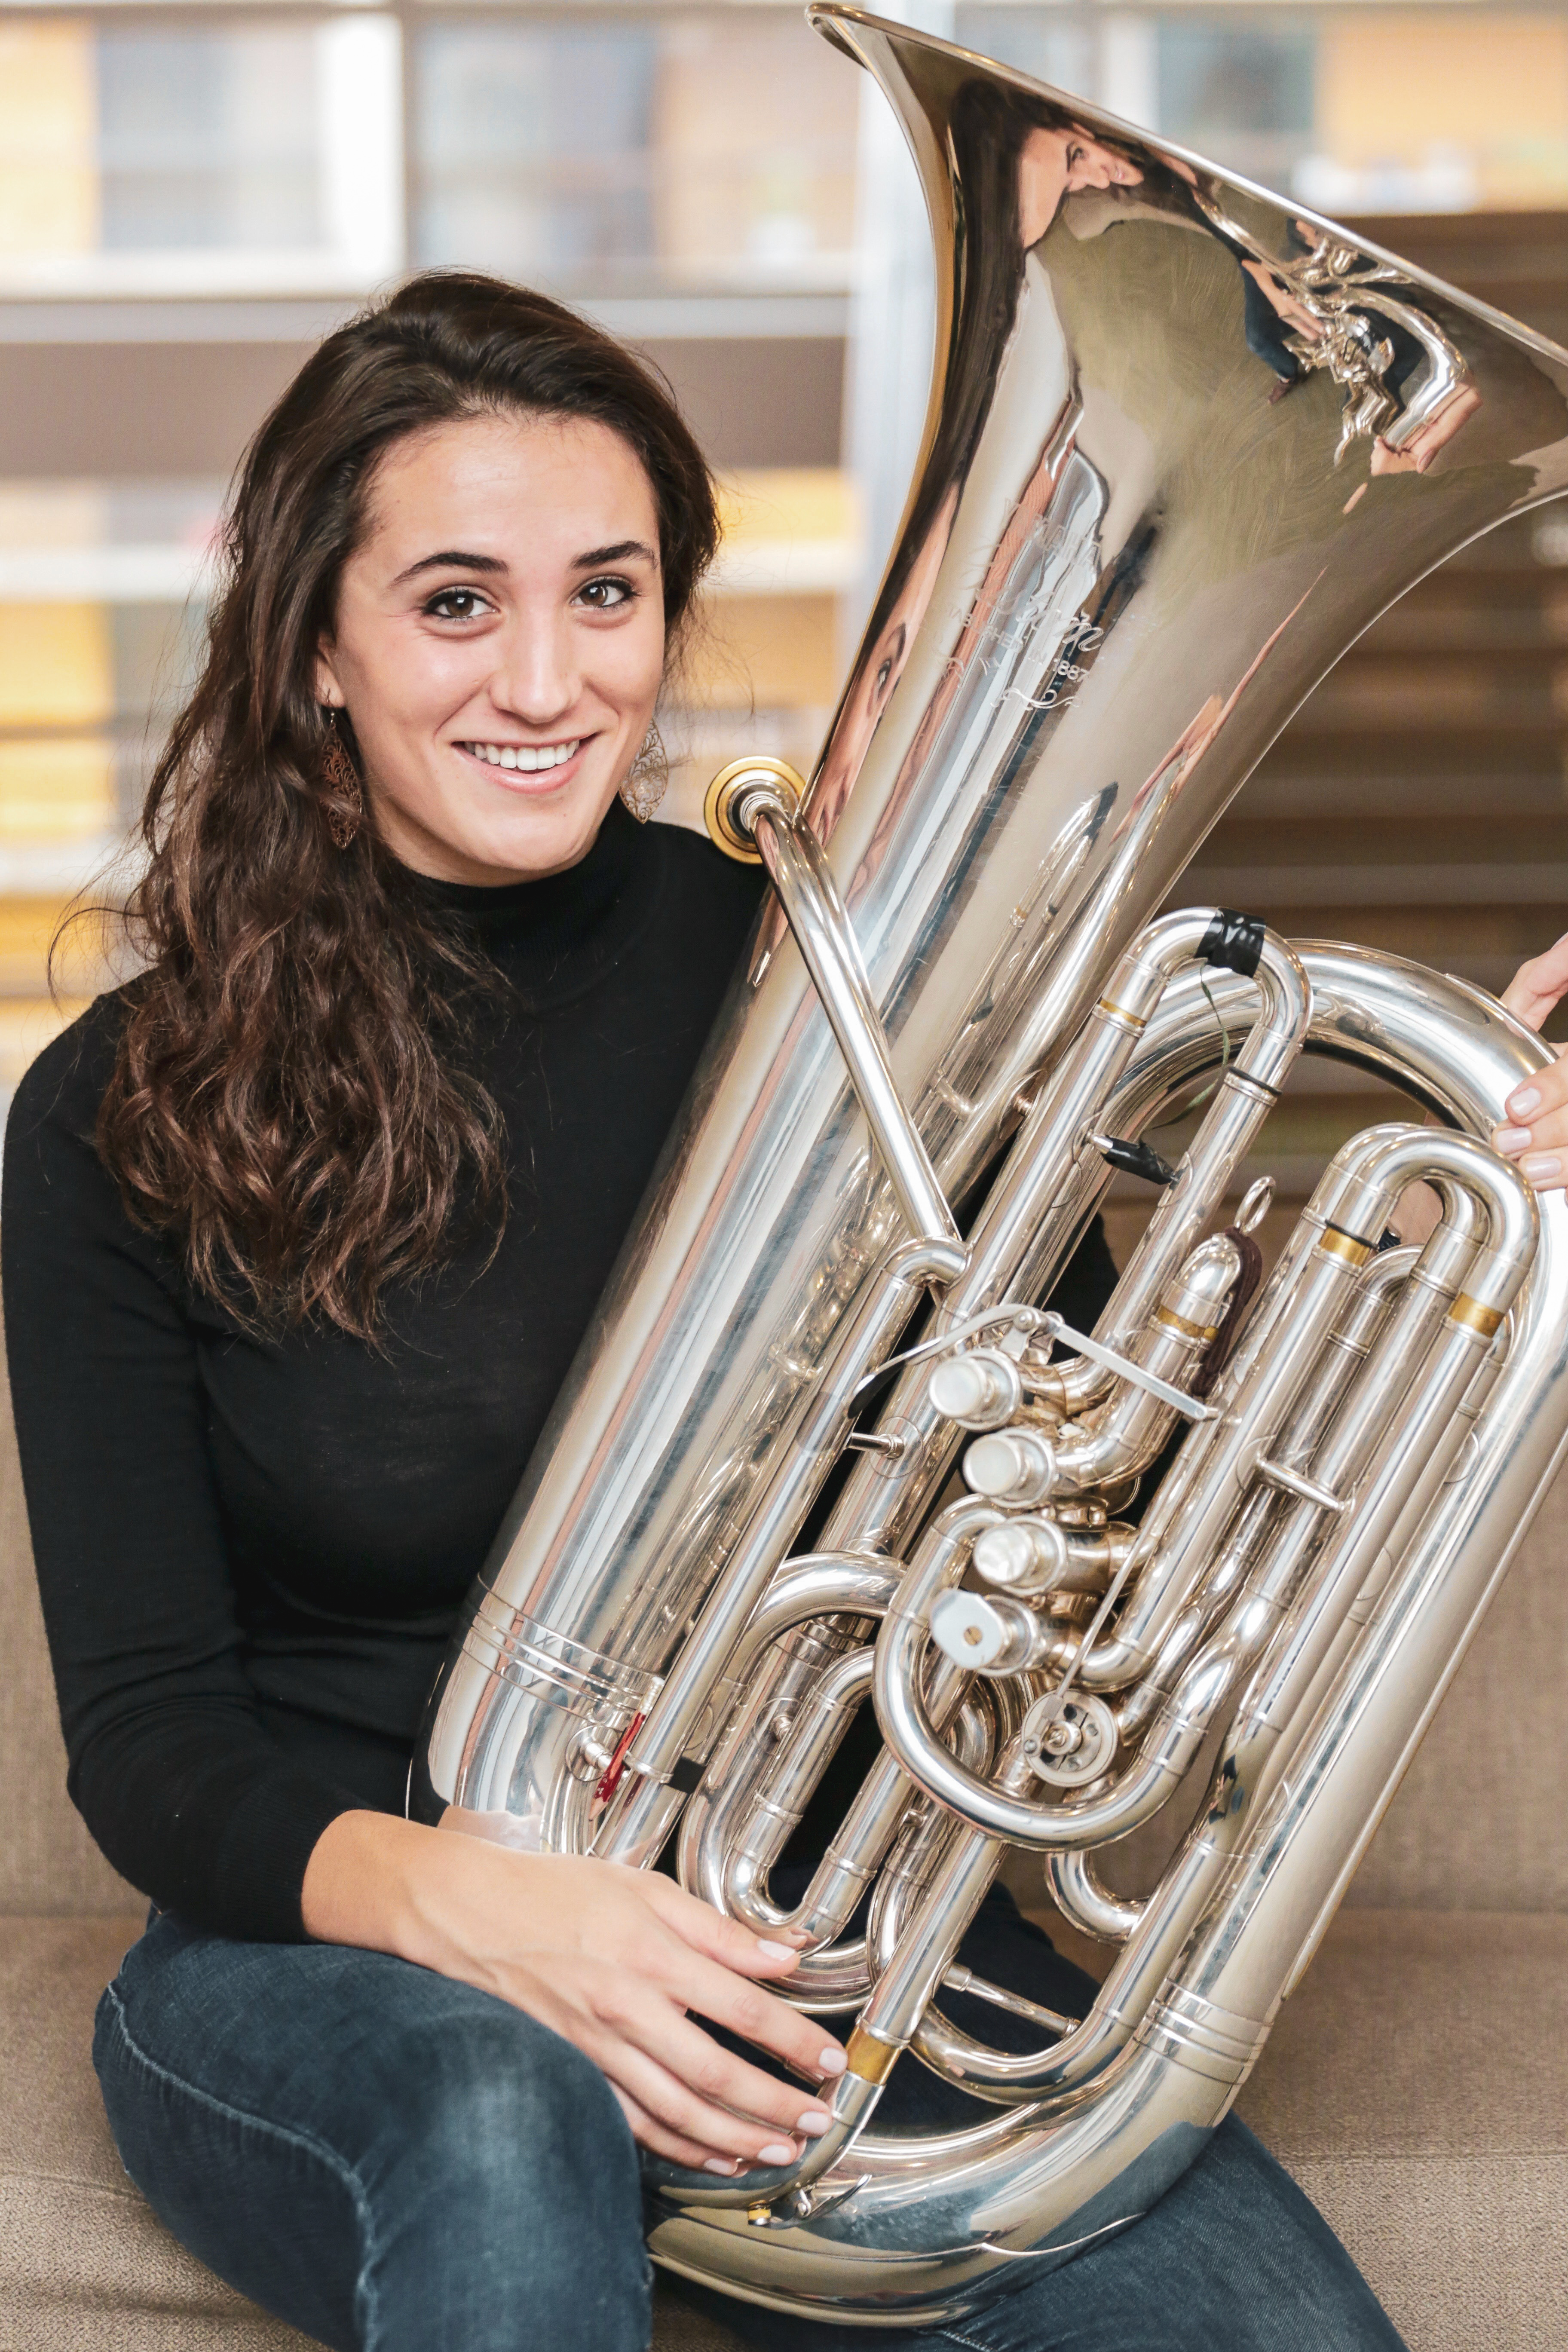 Women outnumbered, not outgunned at Tuba-Euphonium Workshop, Local